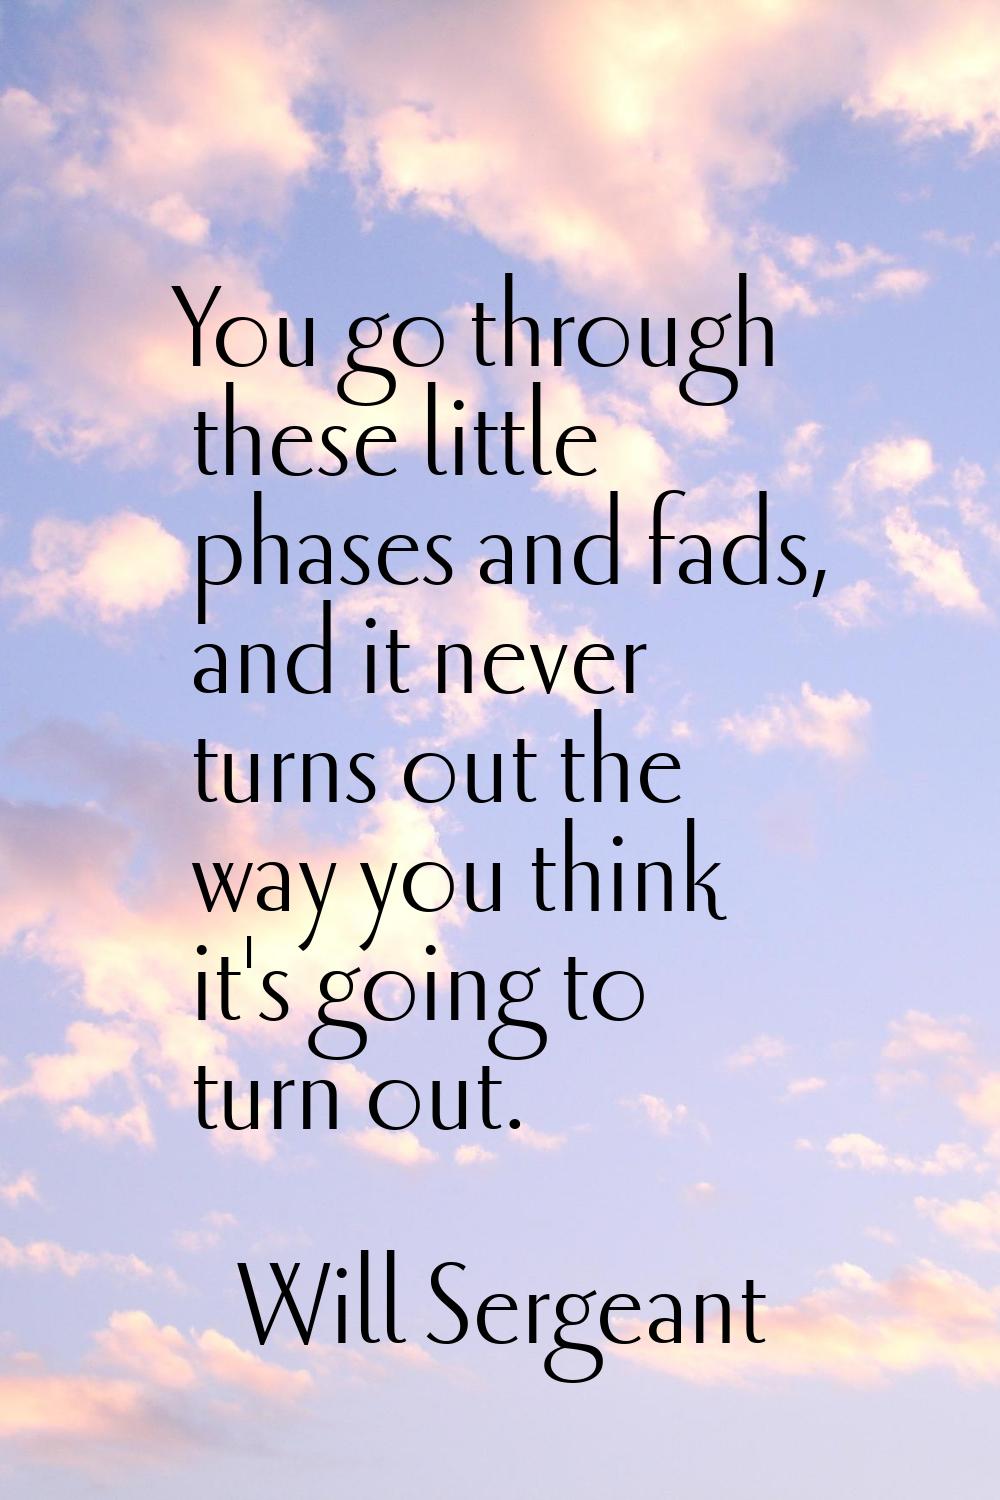 You go through these little phases and fads, and it never turns out the way you think it's going to